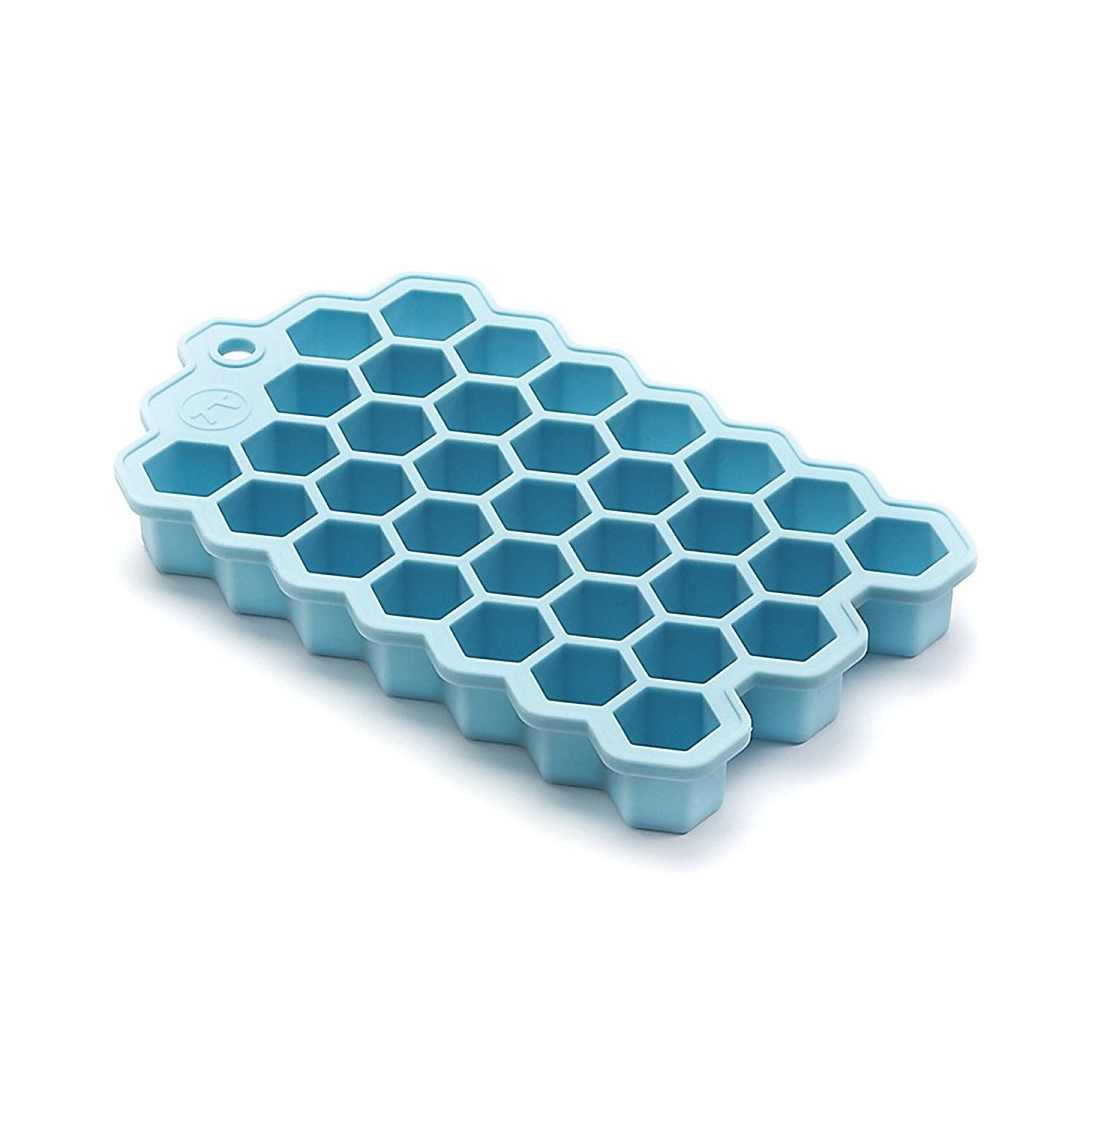 Outset Hex Mold Silicone Ice Cube Tray | Small